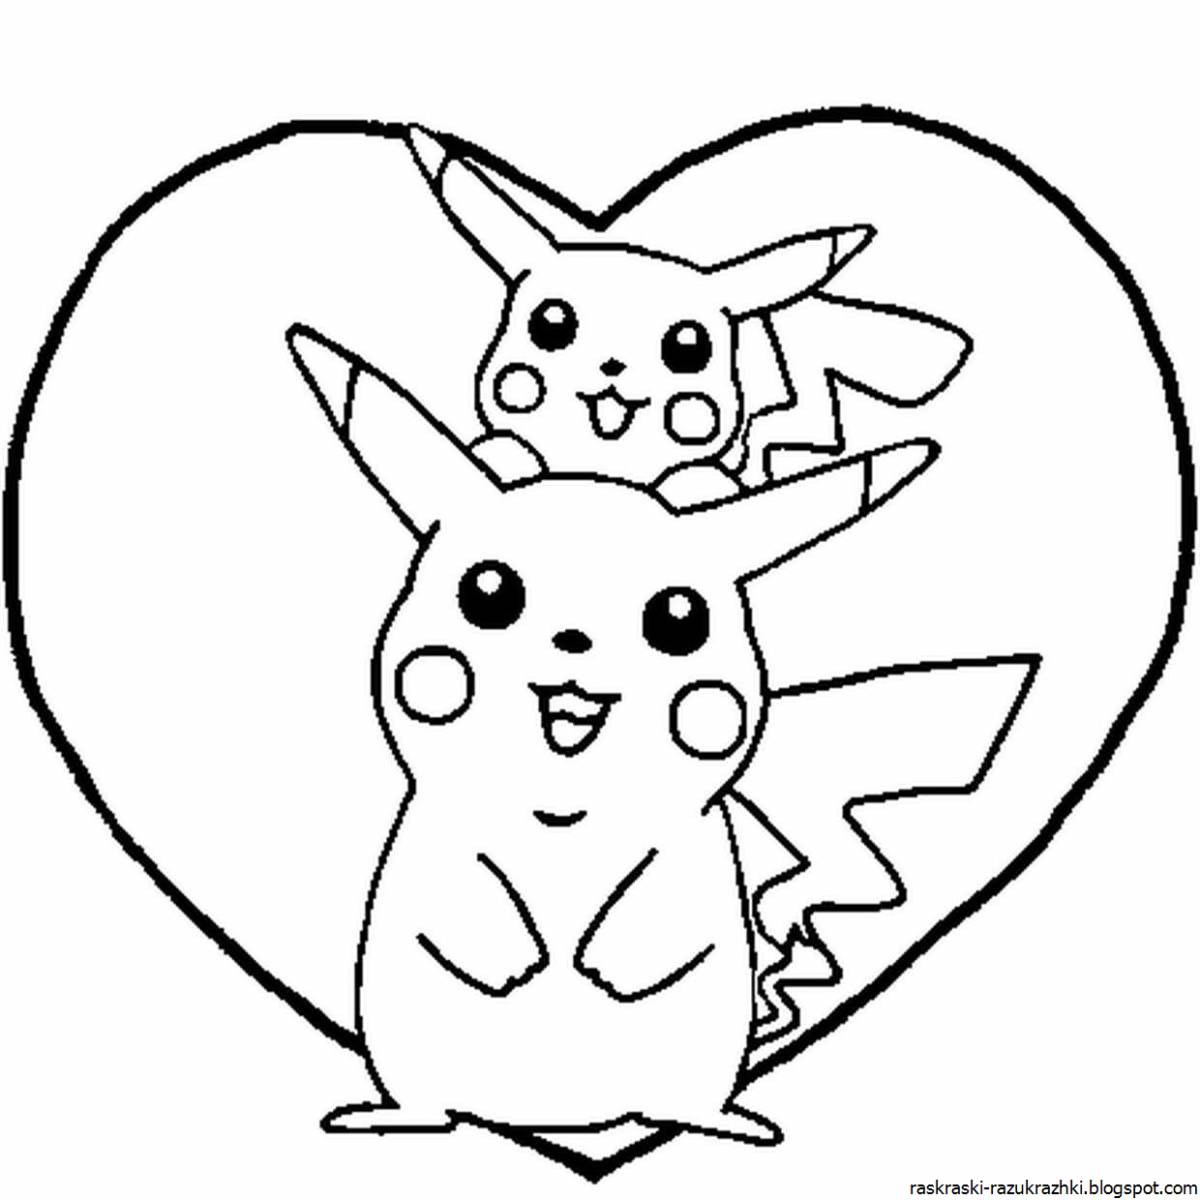 Sweet pikachu coloring page